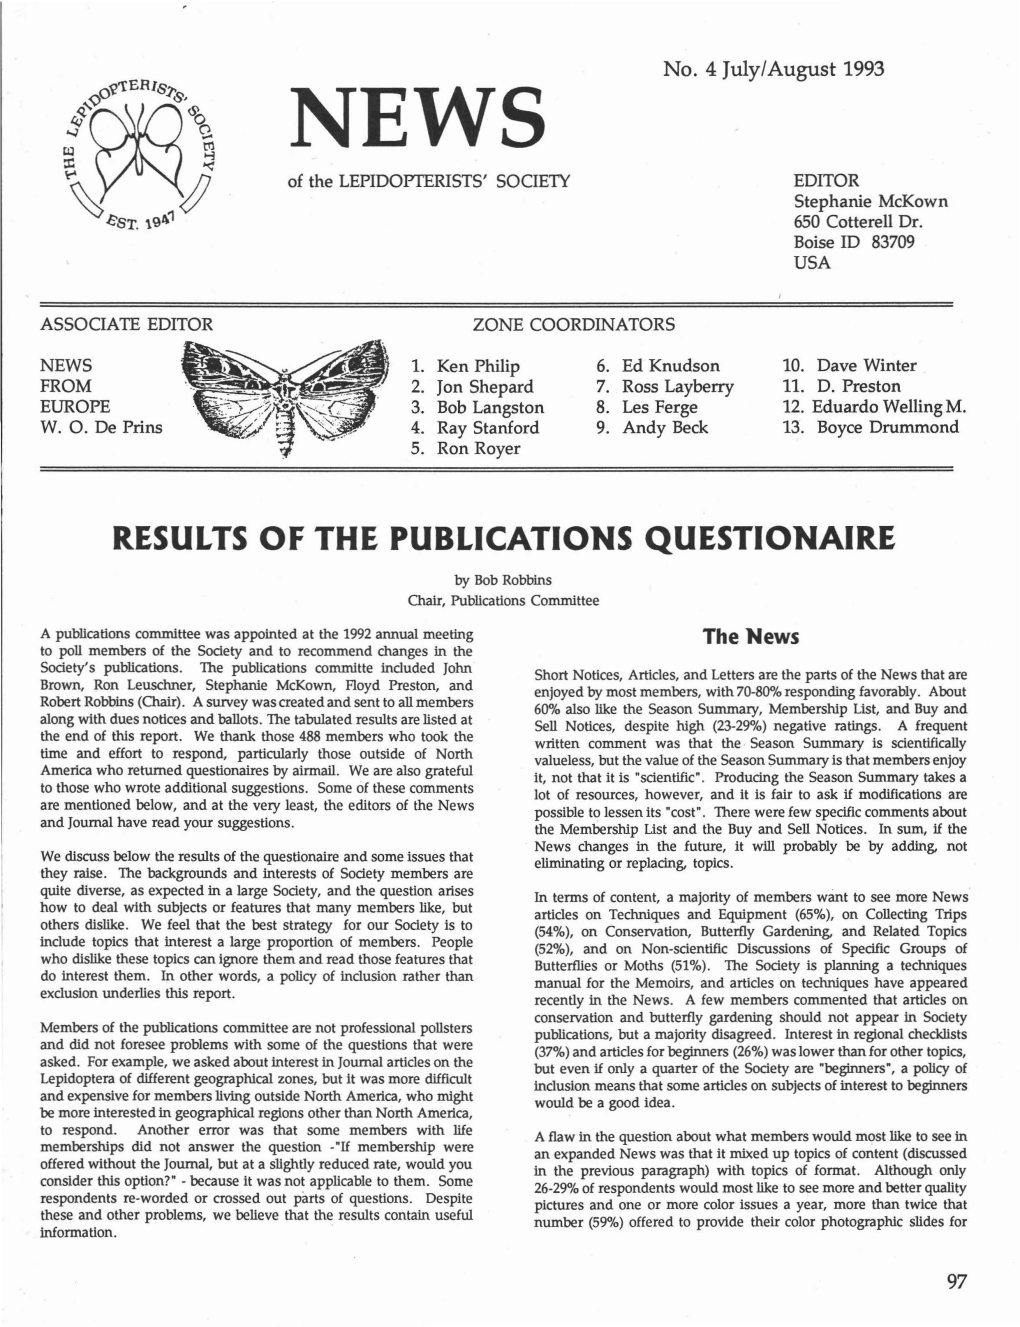 Results of the Publications Questionaire